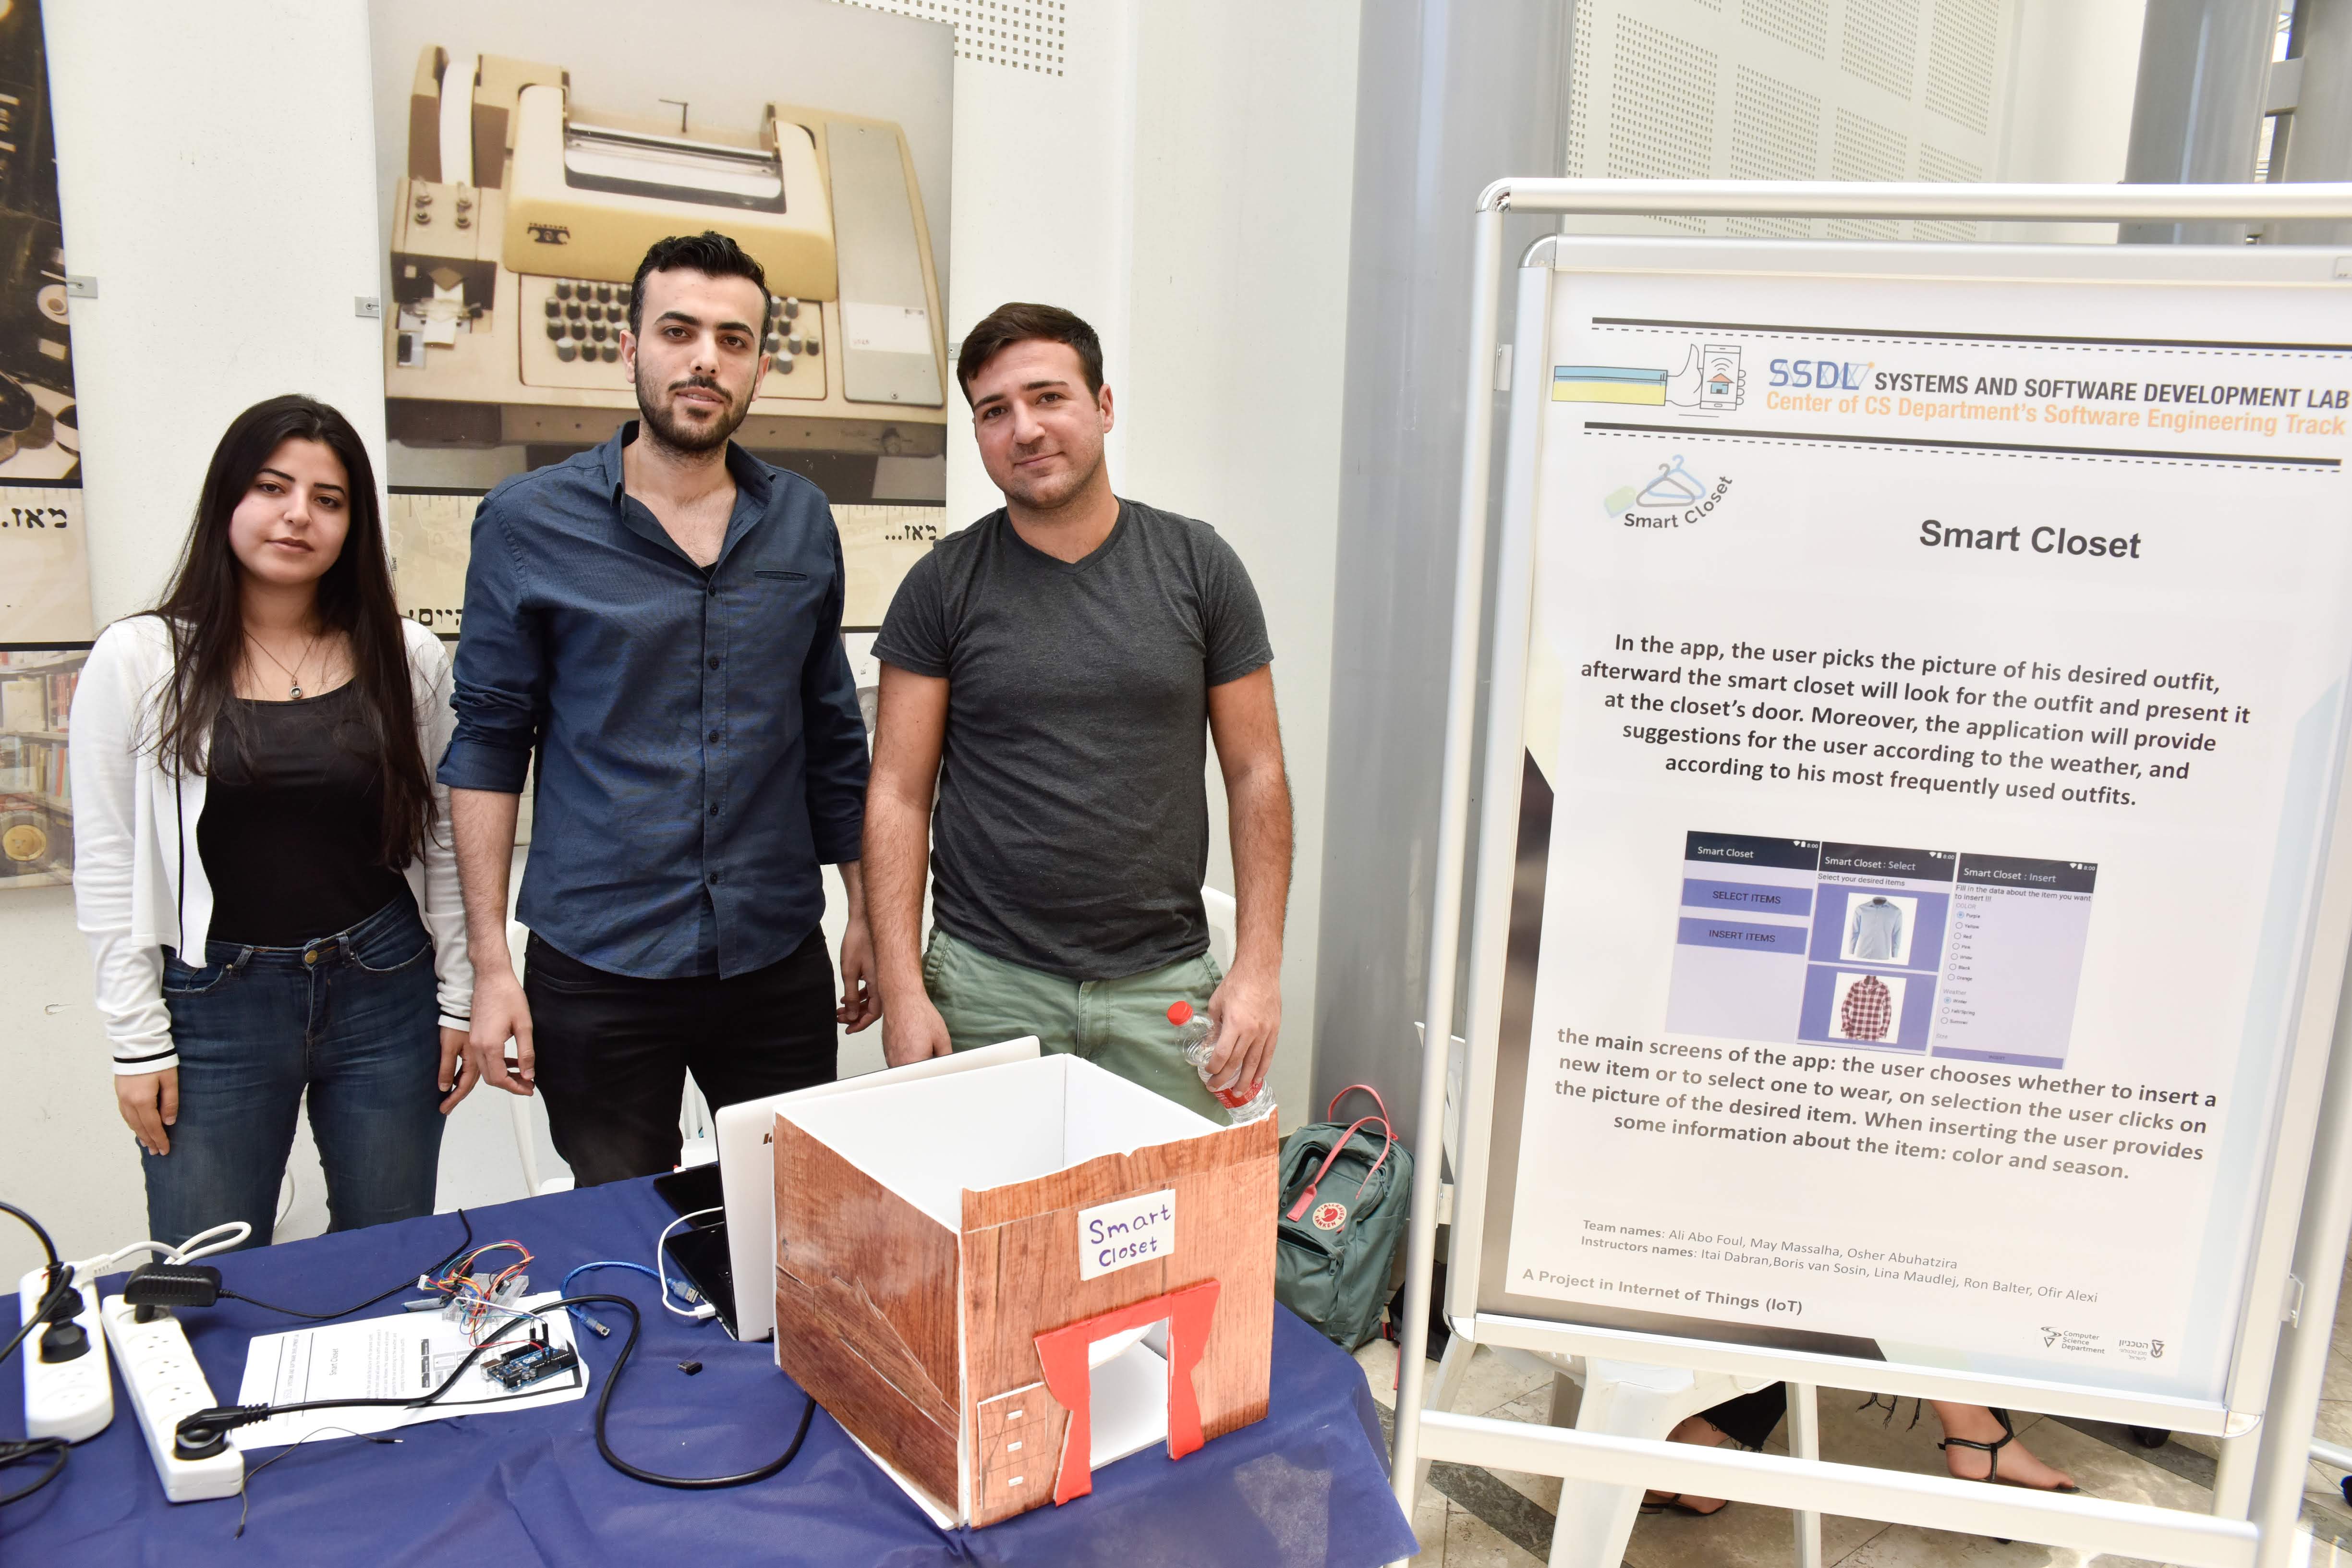 Project Fair in IoT, Software, Android Apps, AI, Cyber, Computer Security, and Networks